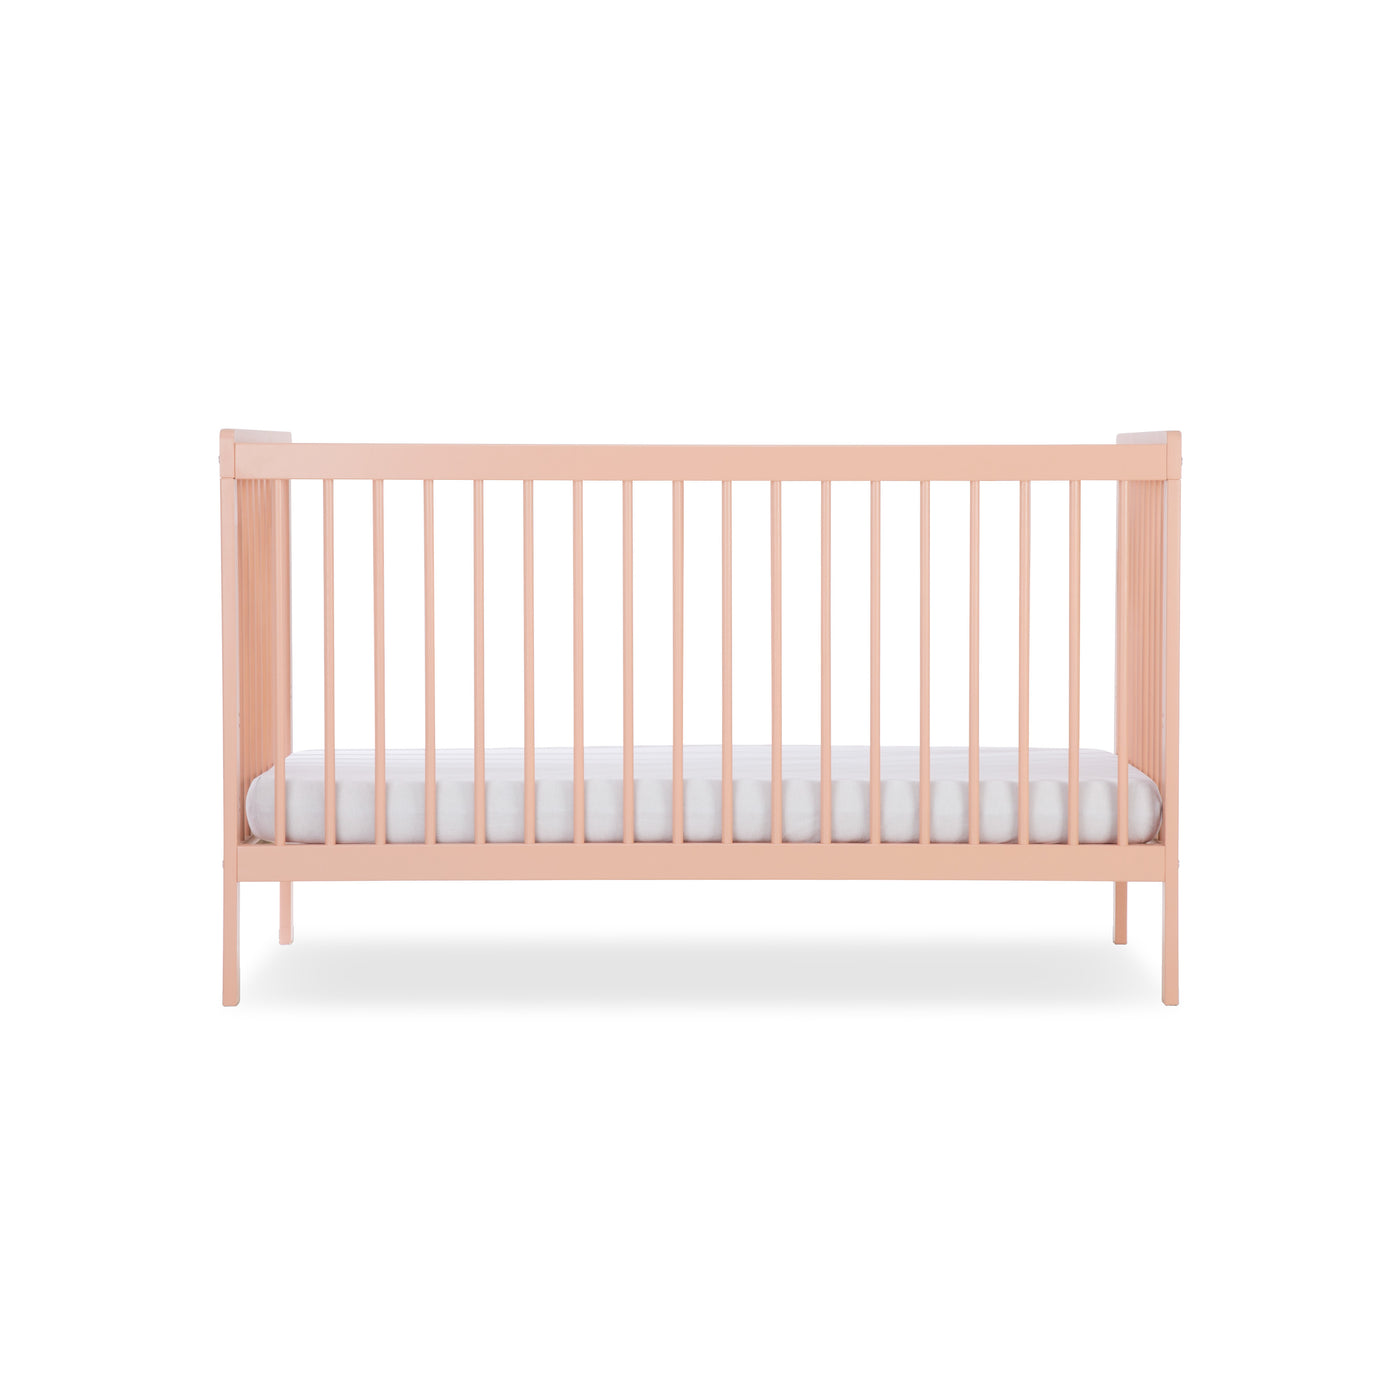 CuddleCo Nola 2pc Changer and Cot Bed - Soft Blush